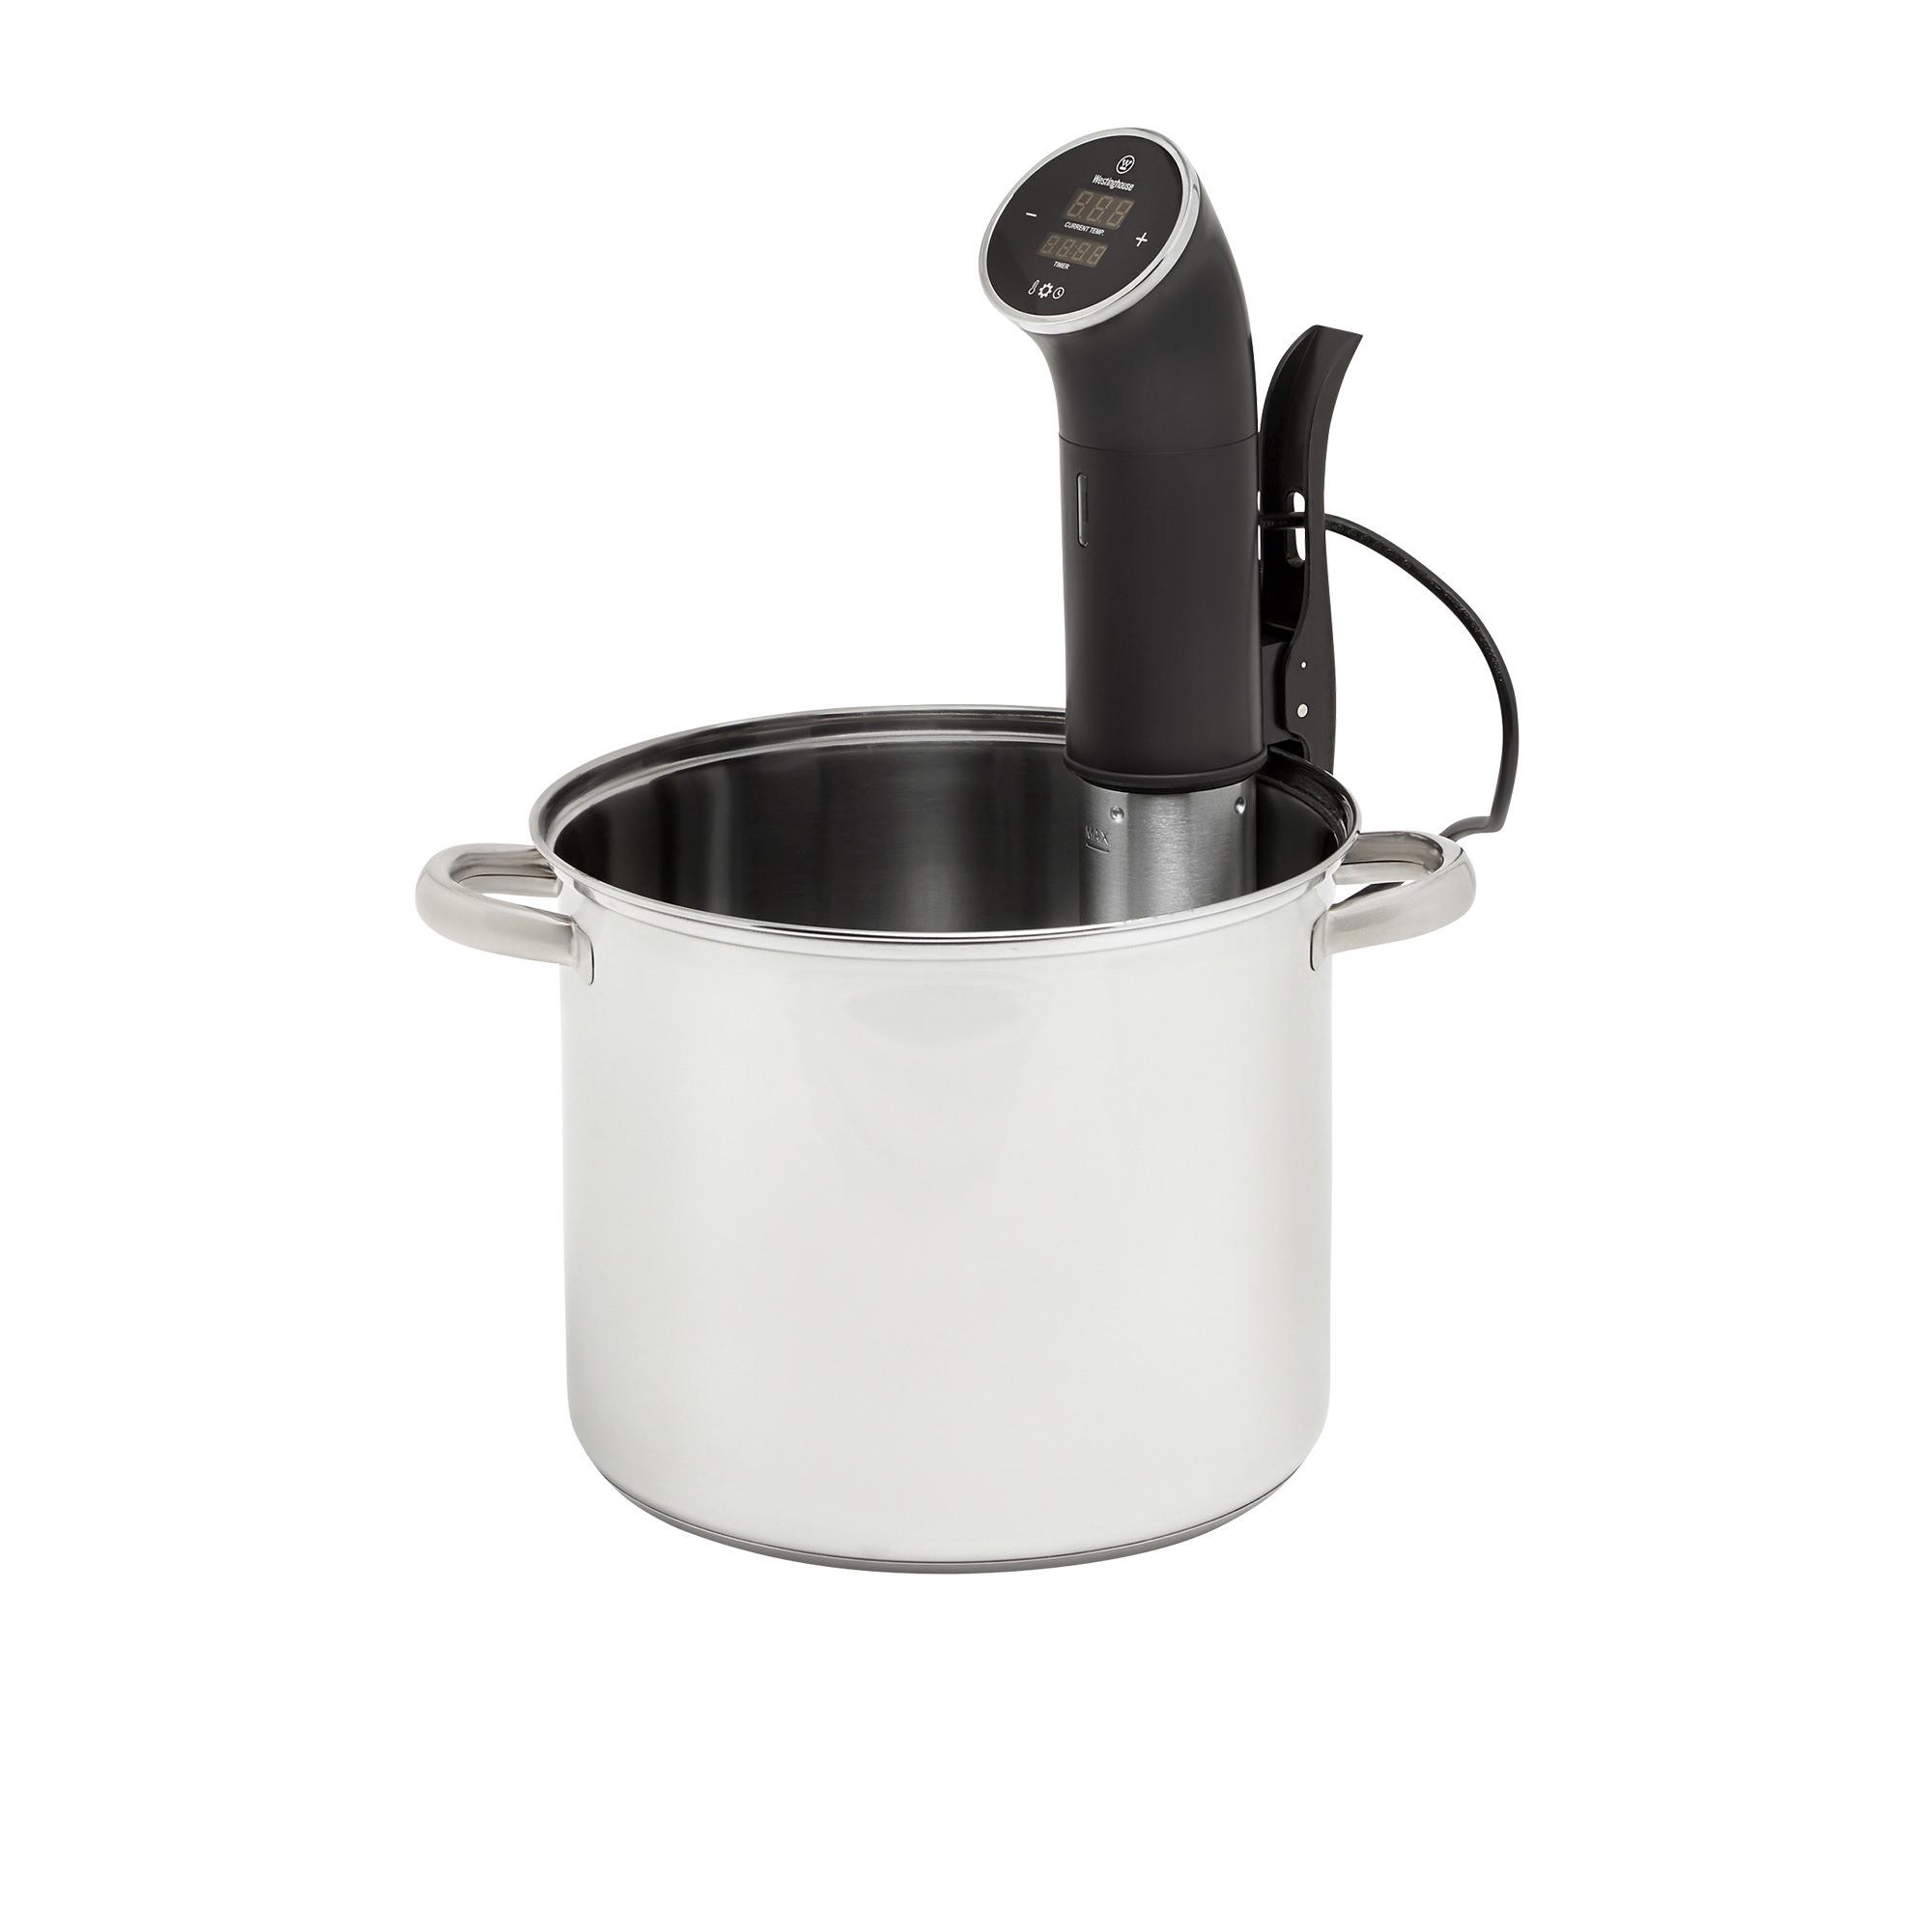 Westinghouse Sous Vide Immersion Cooker Image 3